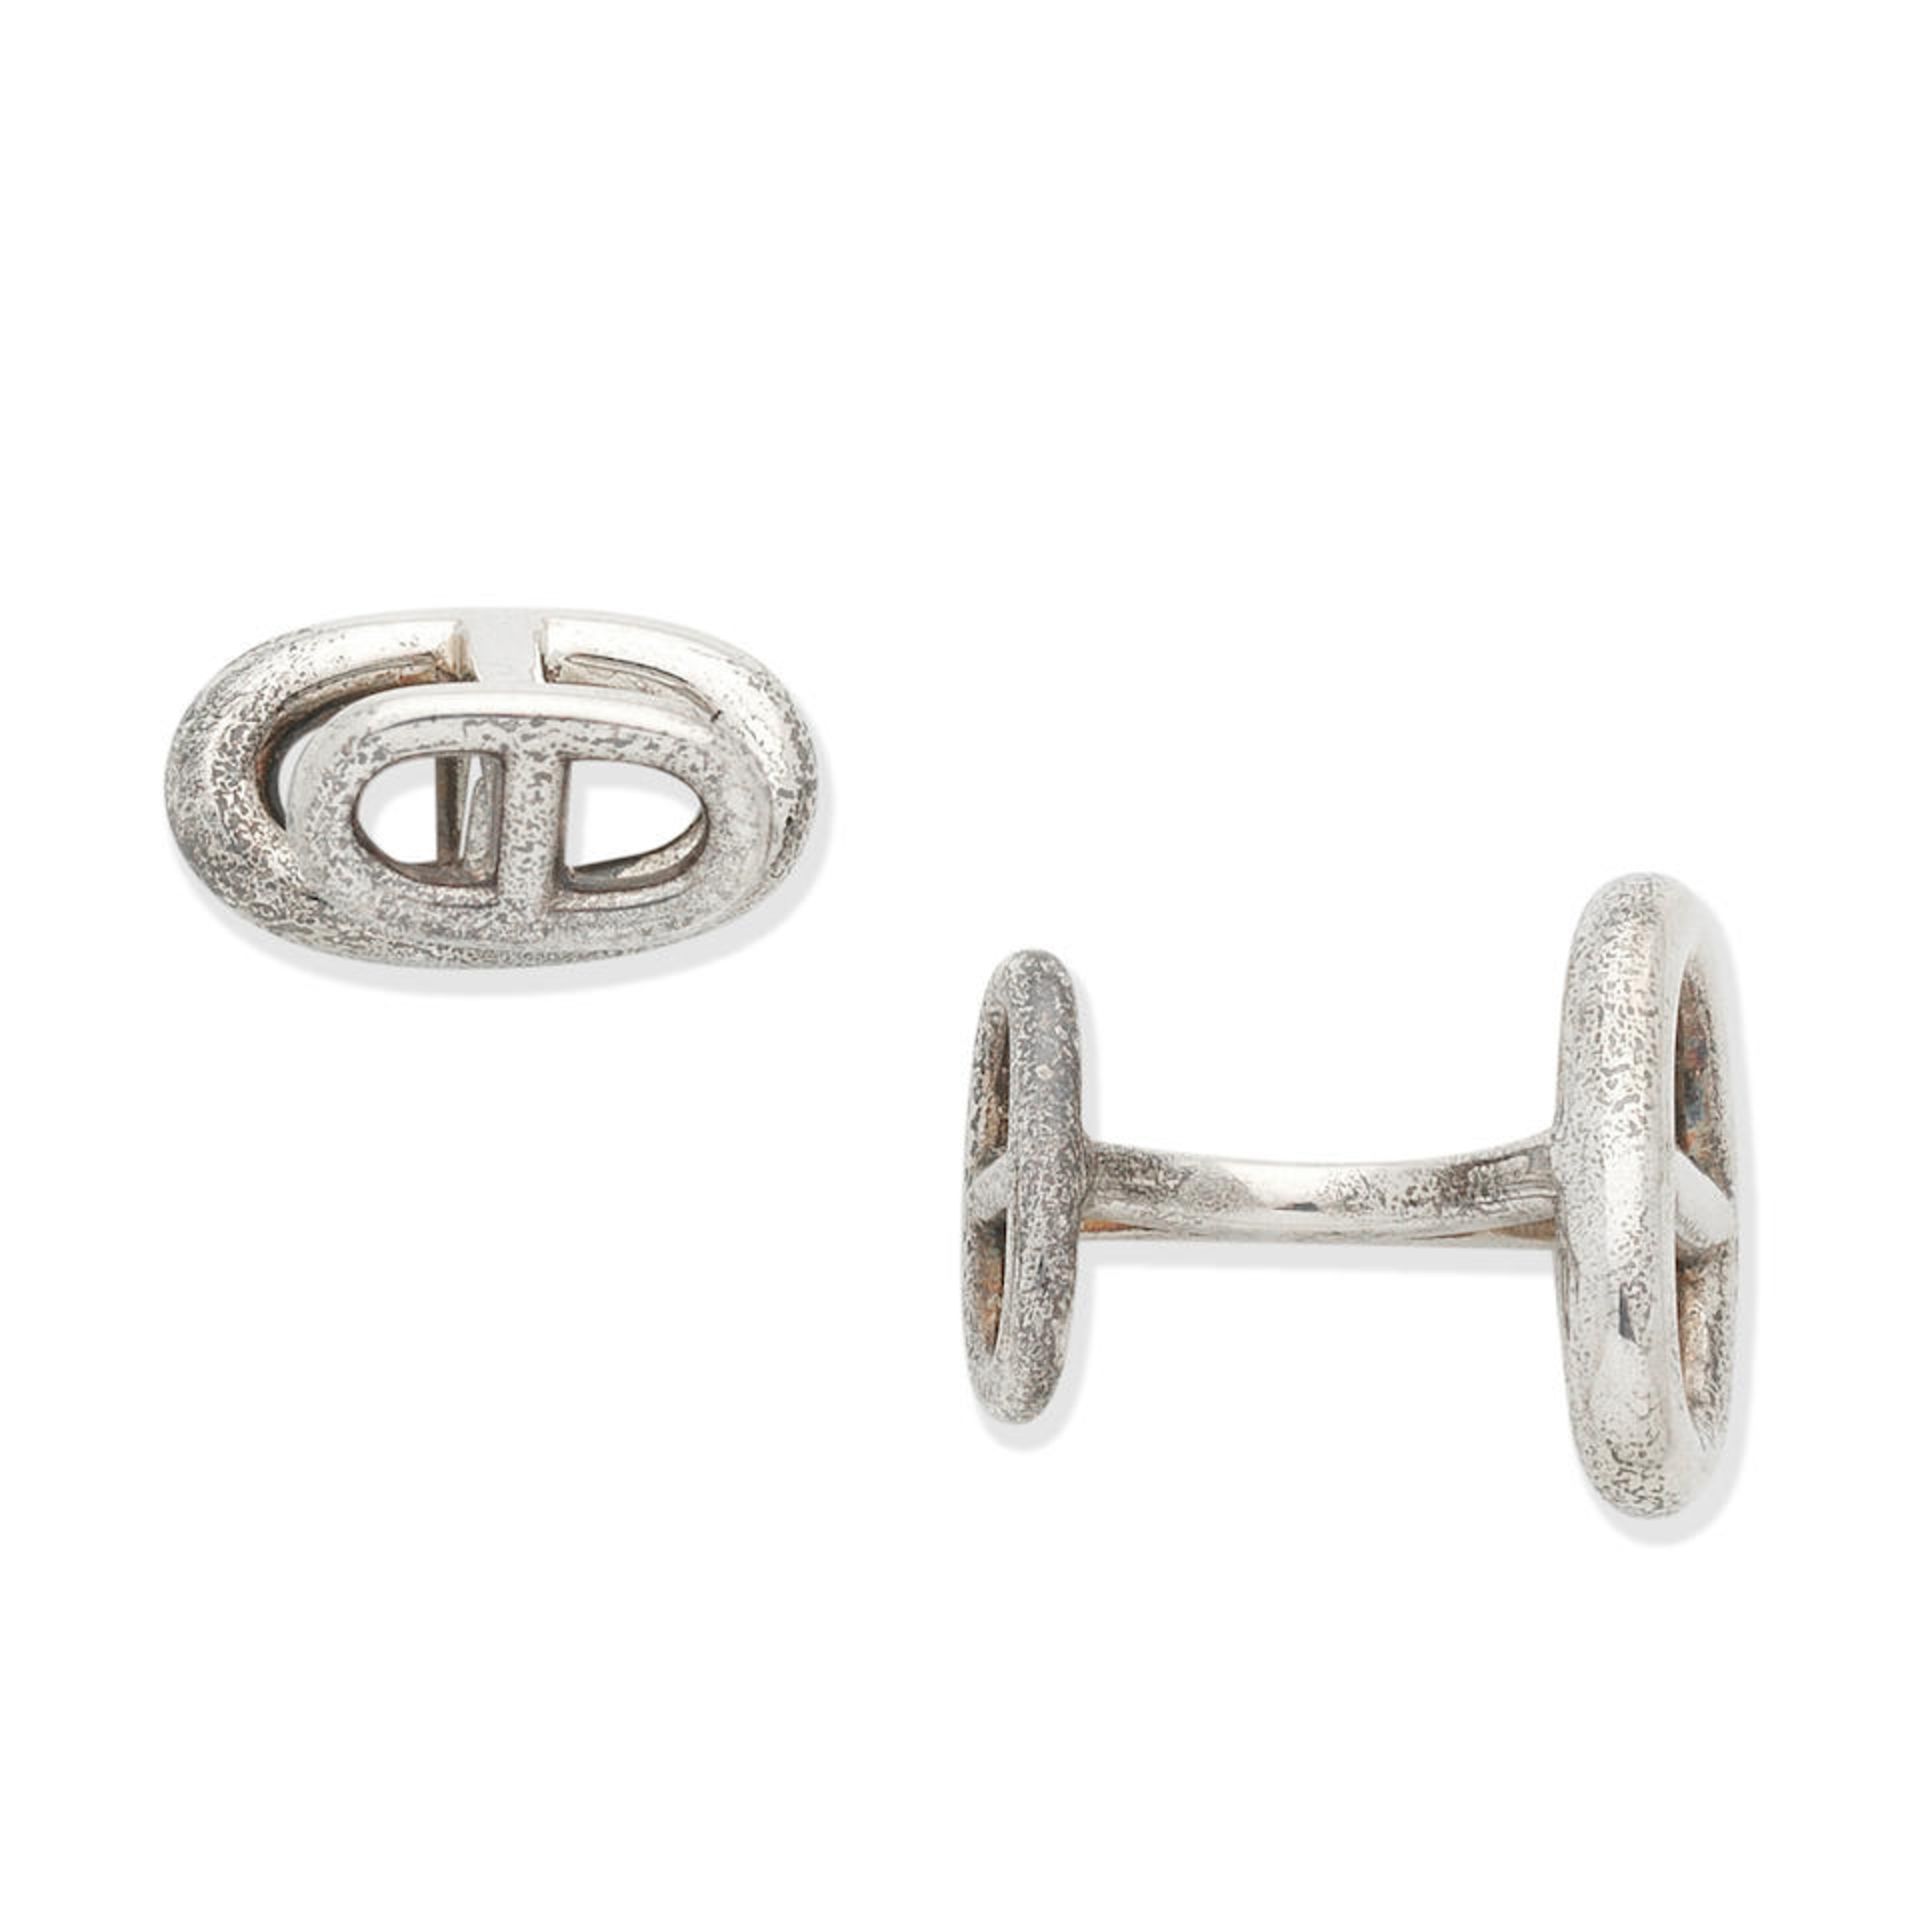 Hermès: a Pair of Sterling Silver Chain D'Ancre Cufflinks (includes box)